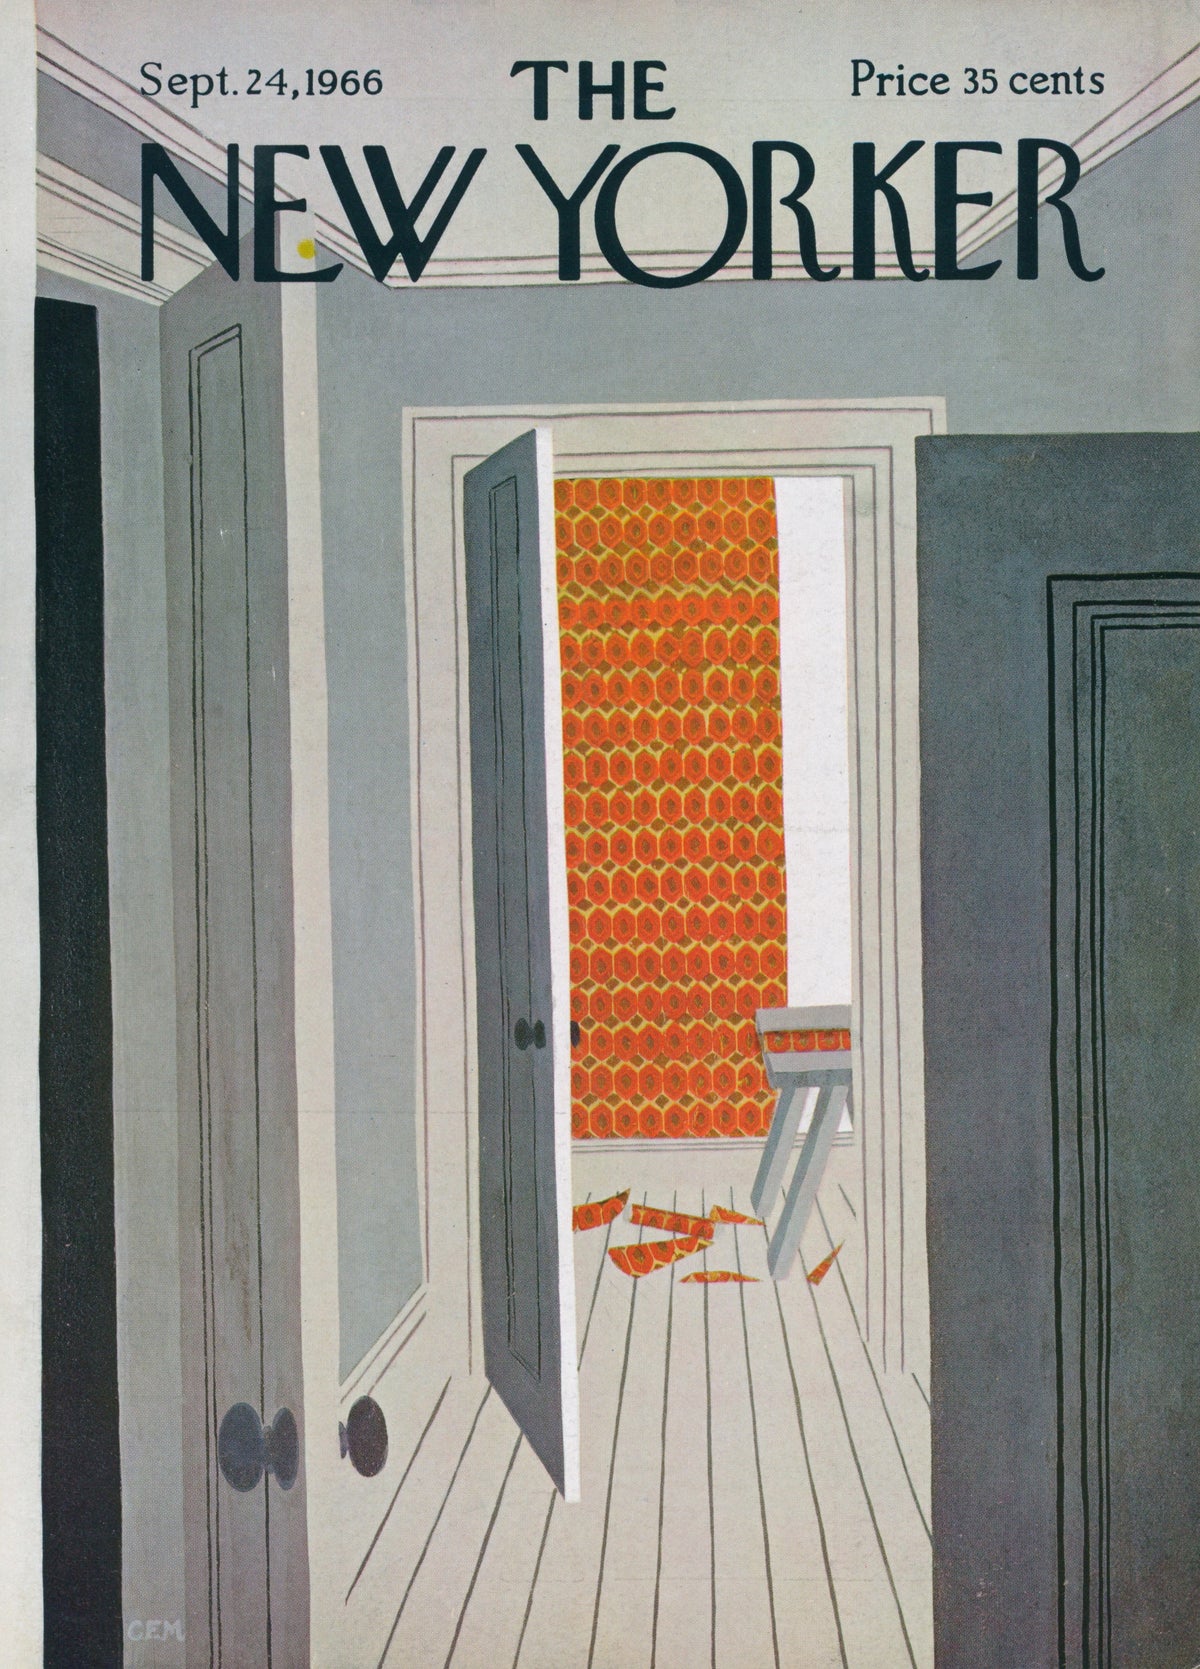 New Wallpaper- The New Yorker - Authentic Vintage Antique Print